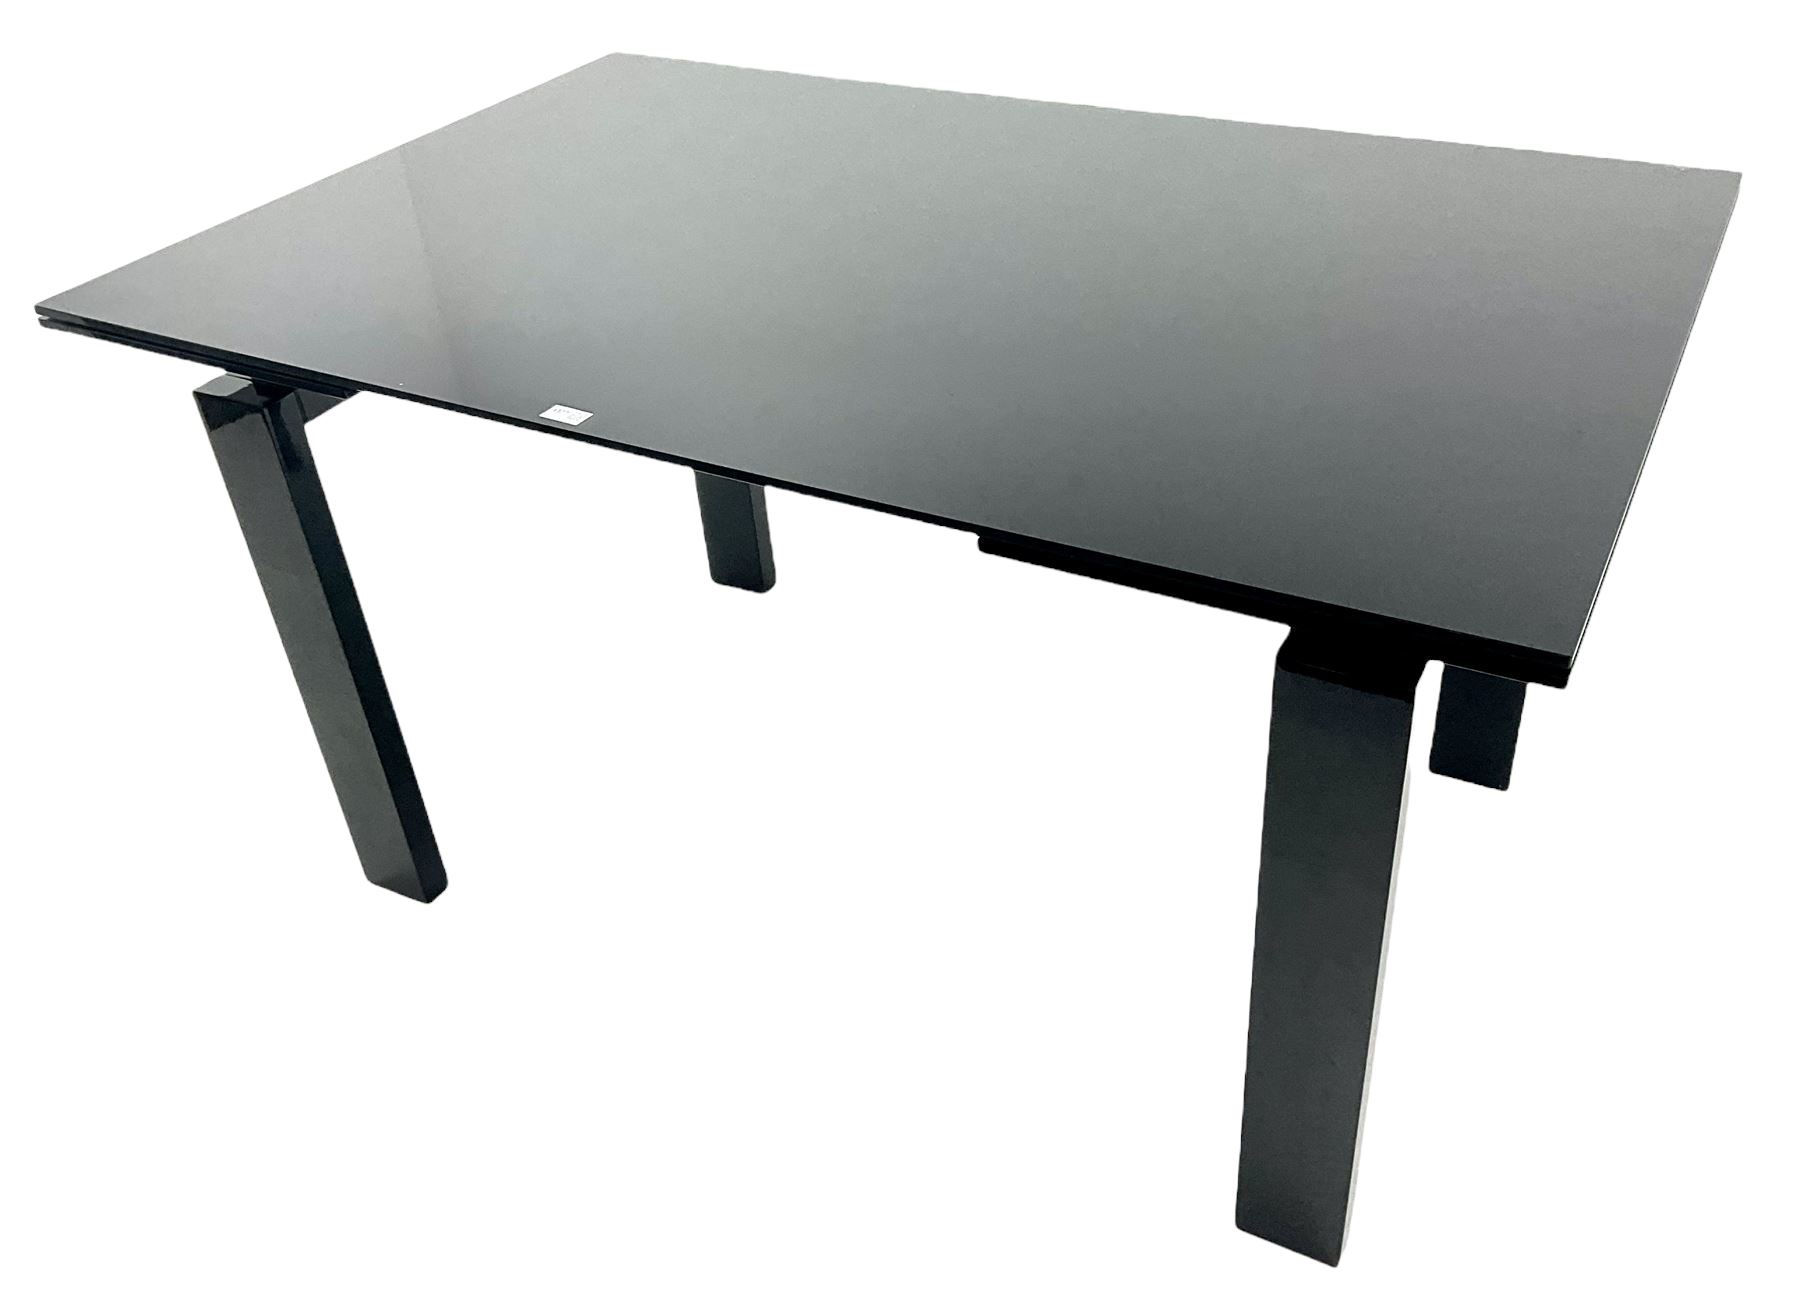 Casabella Dolce Vita black gloss and glass extending dining table - Image 2 of 6